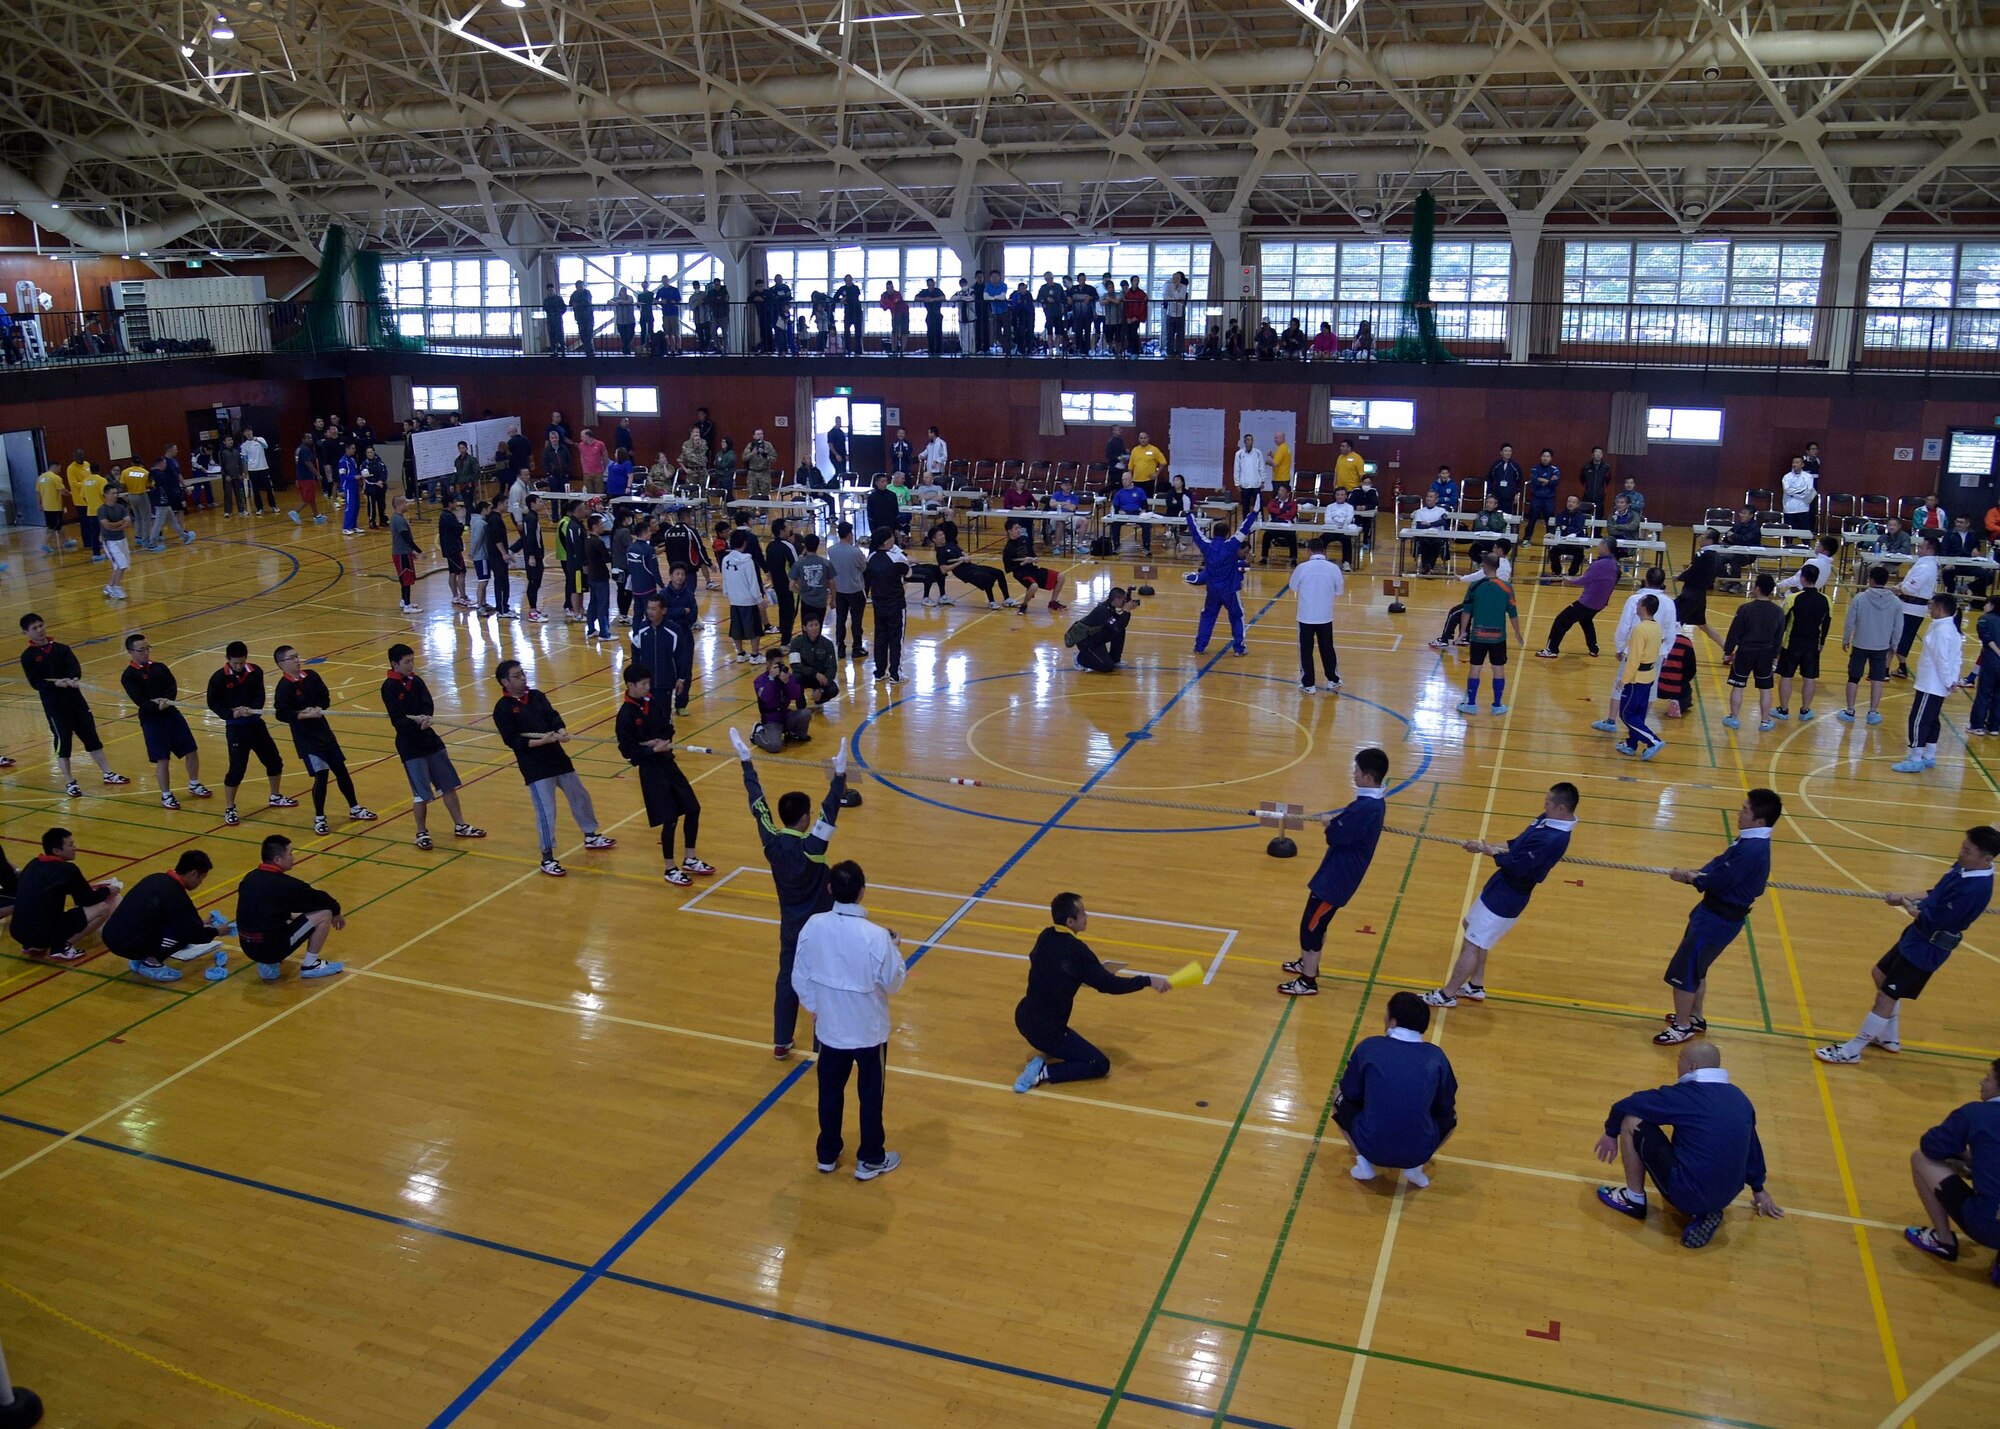 Participants of the 15th Annual Northern Air Defense Force Commander’s Cup compete throughout the Japan Air Self-Defense Force gym, at Misawa Air Base, Japan, Oct. 22, 2016. This tug-of-war event showcased the partnership and friendship between JASDF, U.S. Air Force, U.S. Navy and Royal Air Force military personnel. RAF joined the event due to their presence here for Guardian North 16, the first-ever bilateral exercise with JASDF. (U.S. Air Force photo by Senior Airman Deana Heitzman)